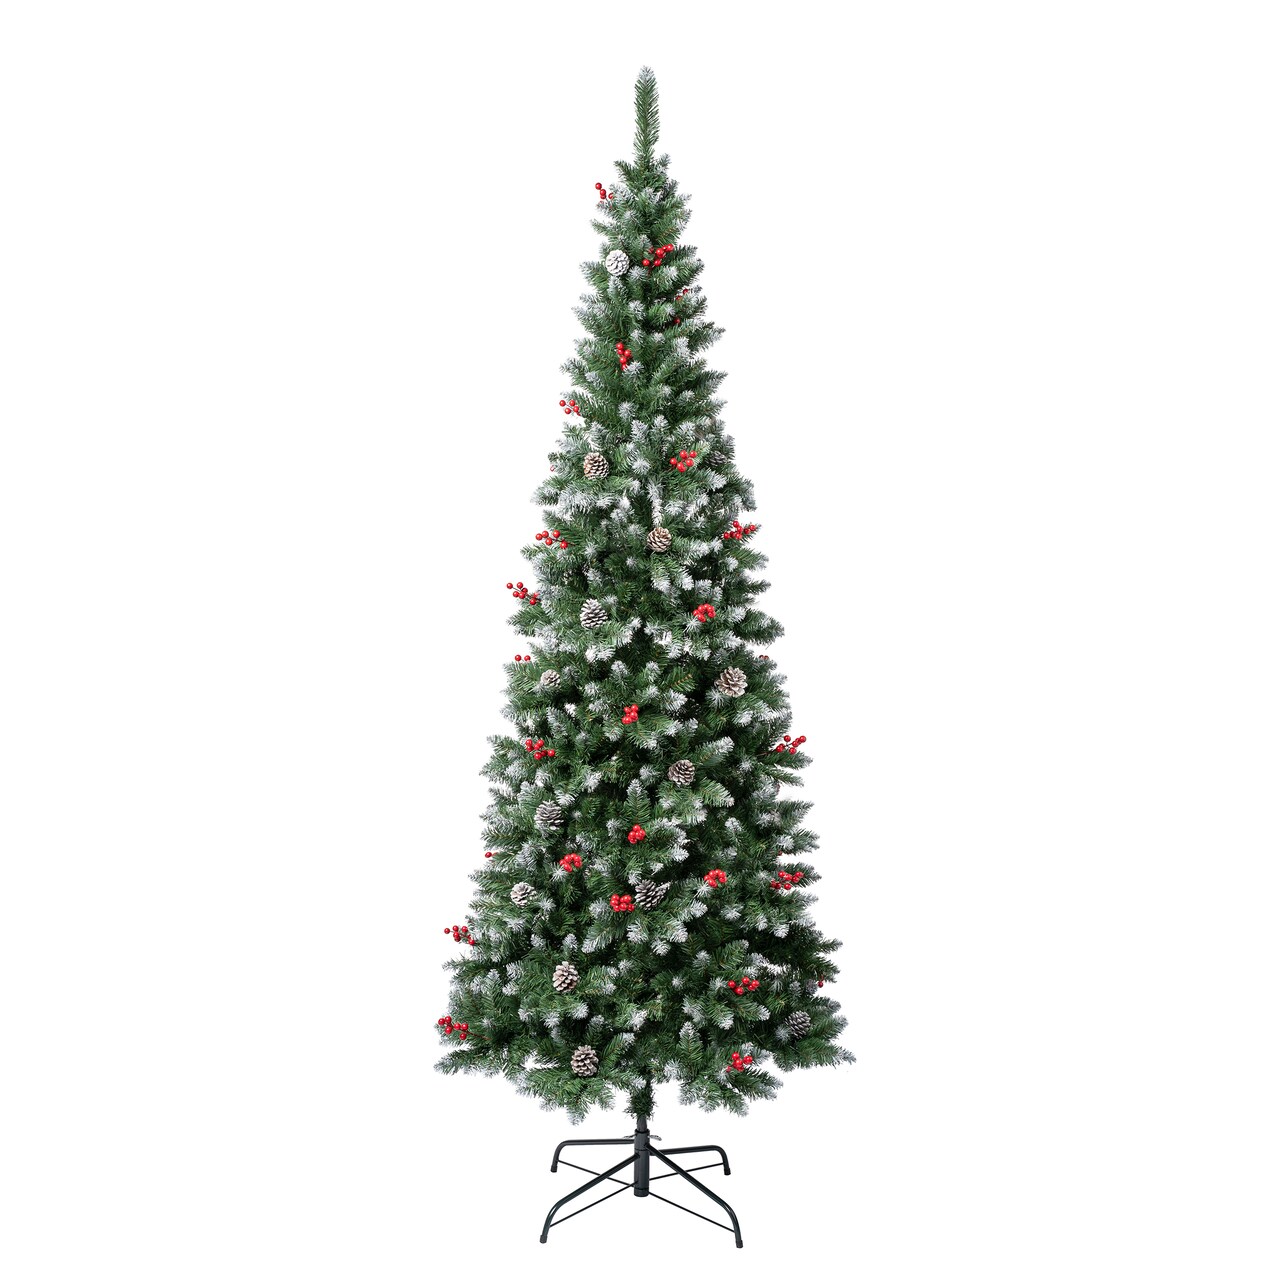 National Tree Company First Frosted Traditions Slim Christmas Tree with Hinged Branches, Pinecones and Red Berries, 7.5 ft